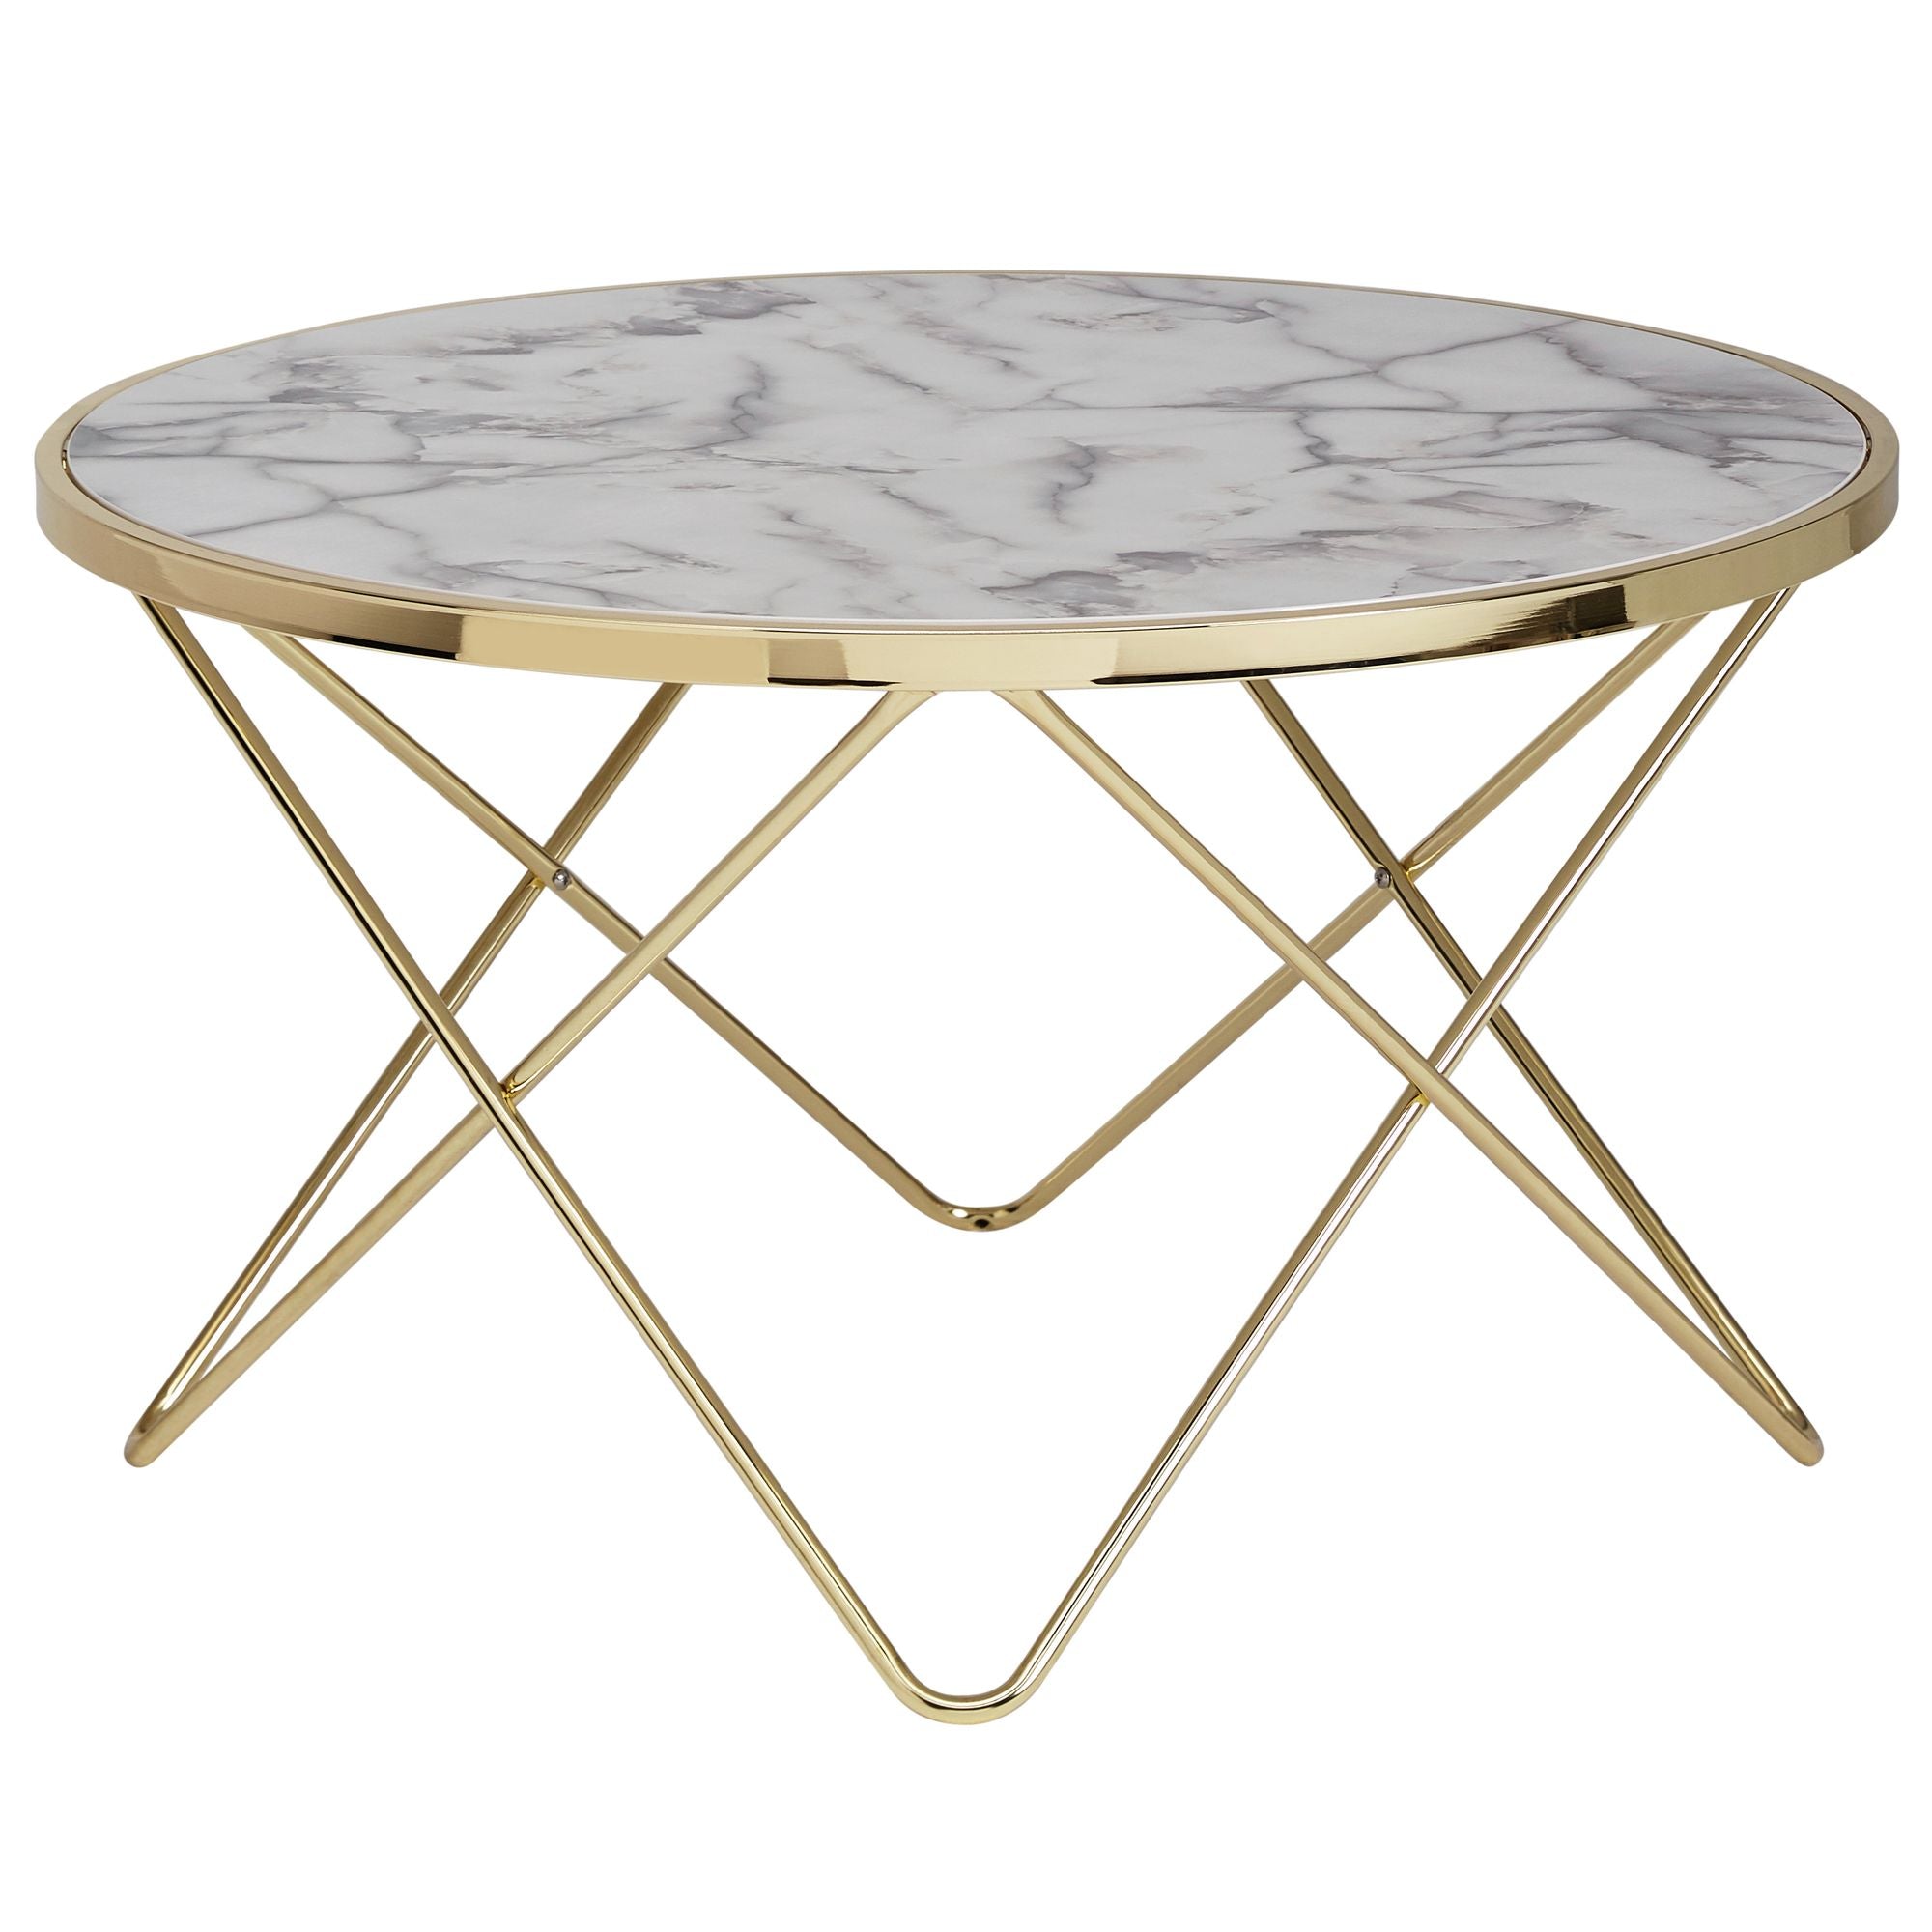 Nancy's Canton Coffee Table - Side Table - Design - Marble Look - Gold - Round - Ø 85cm